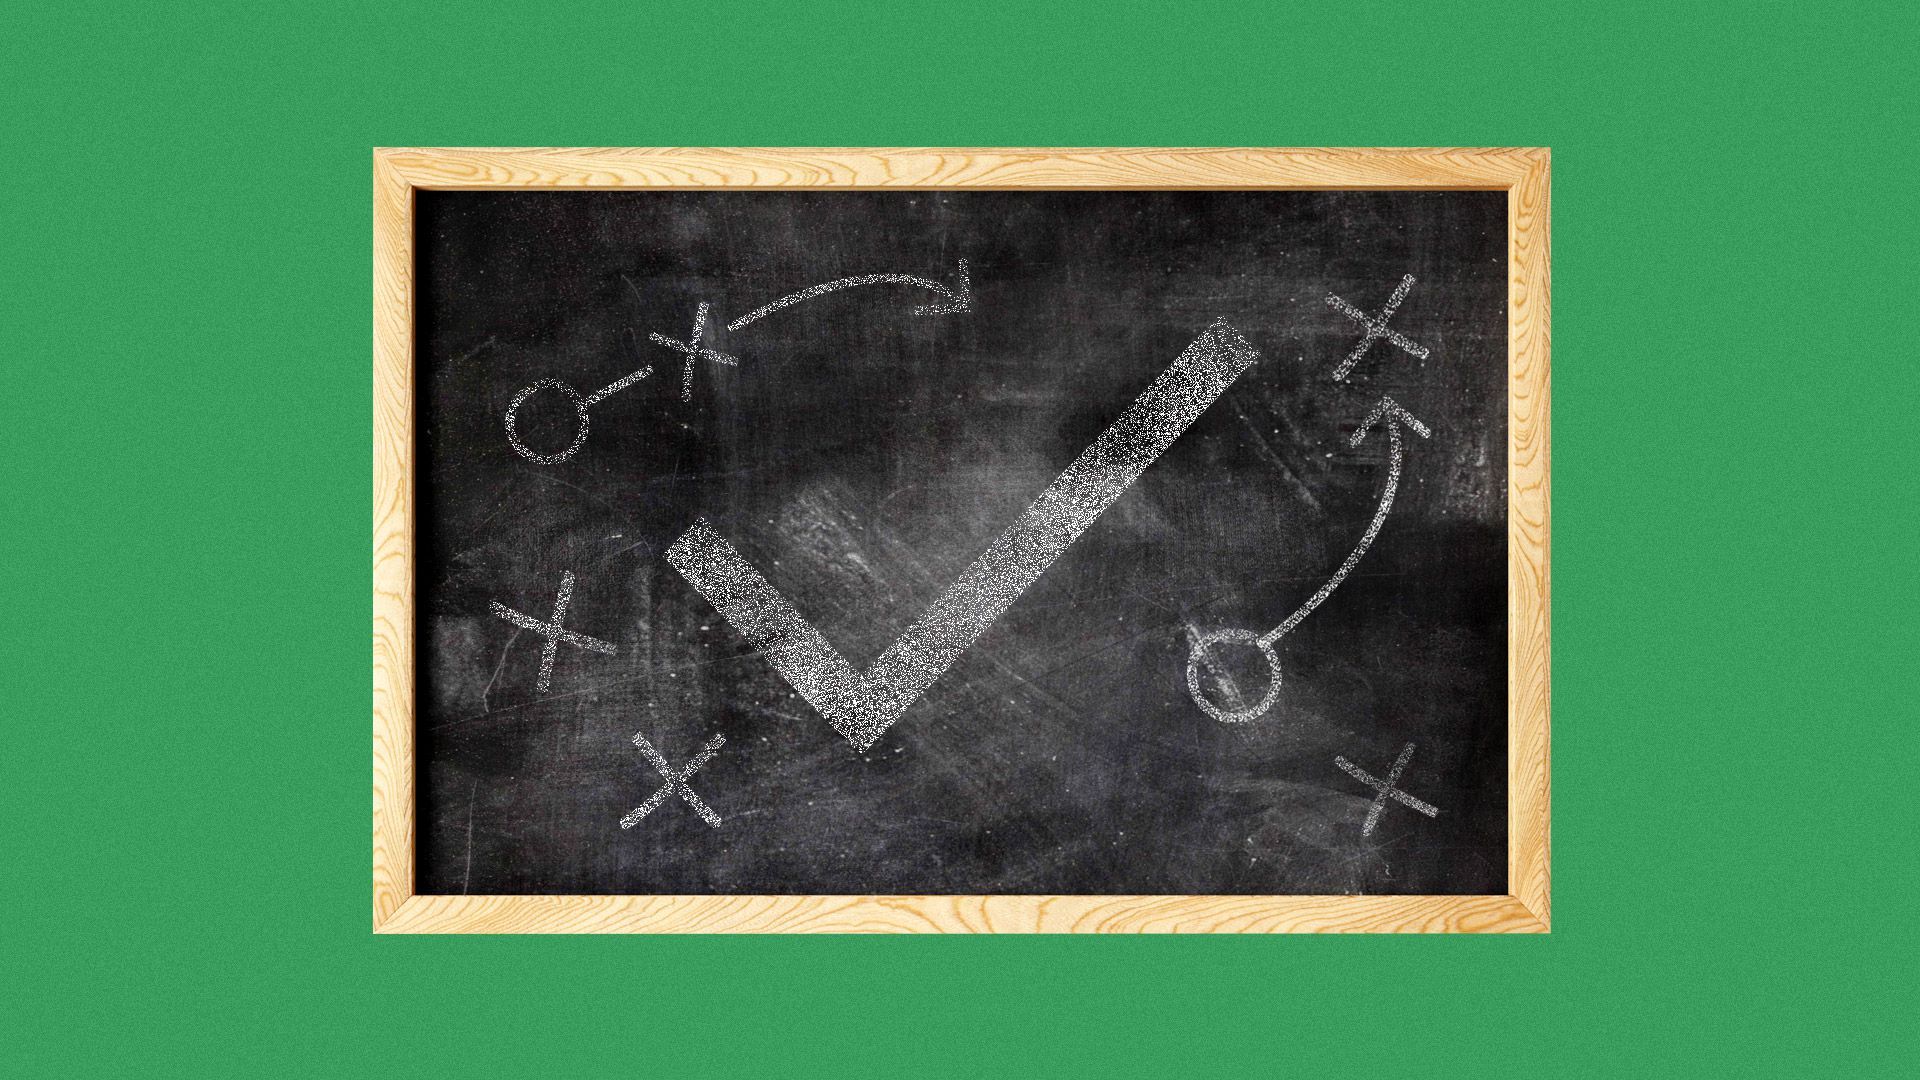 Illustration of chalkboard with large checkmark and football plays